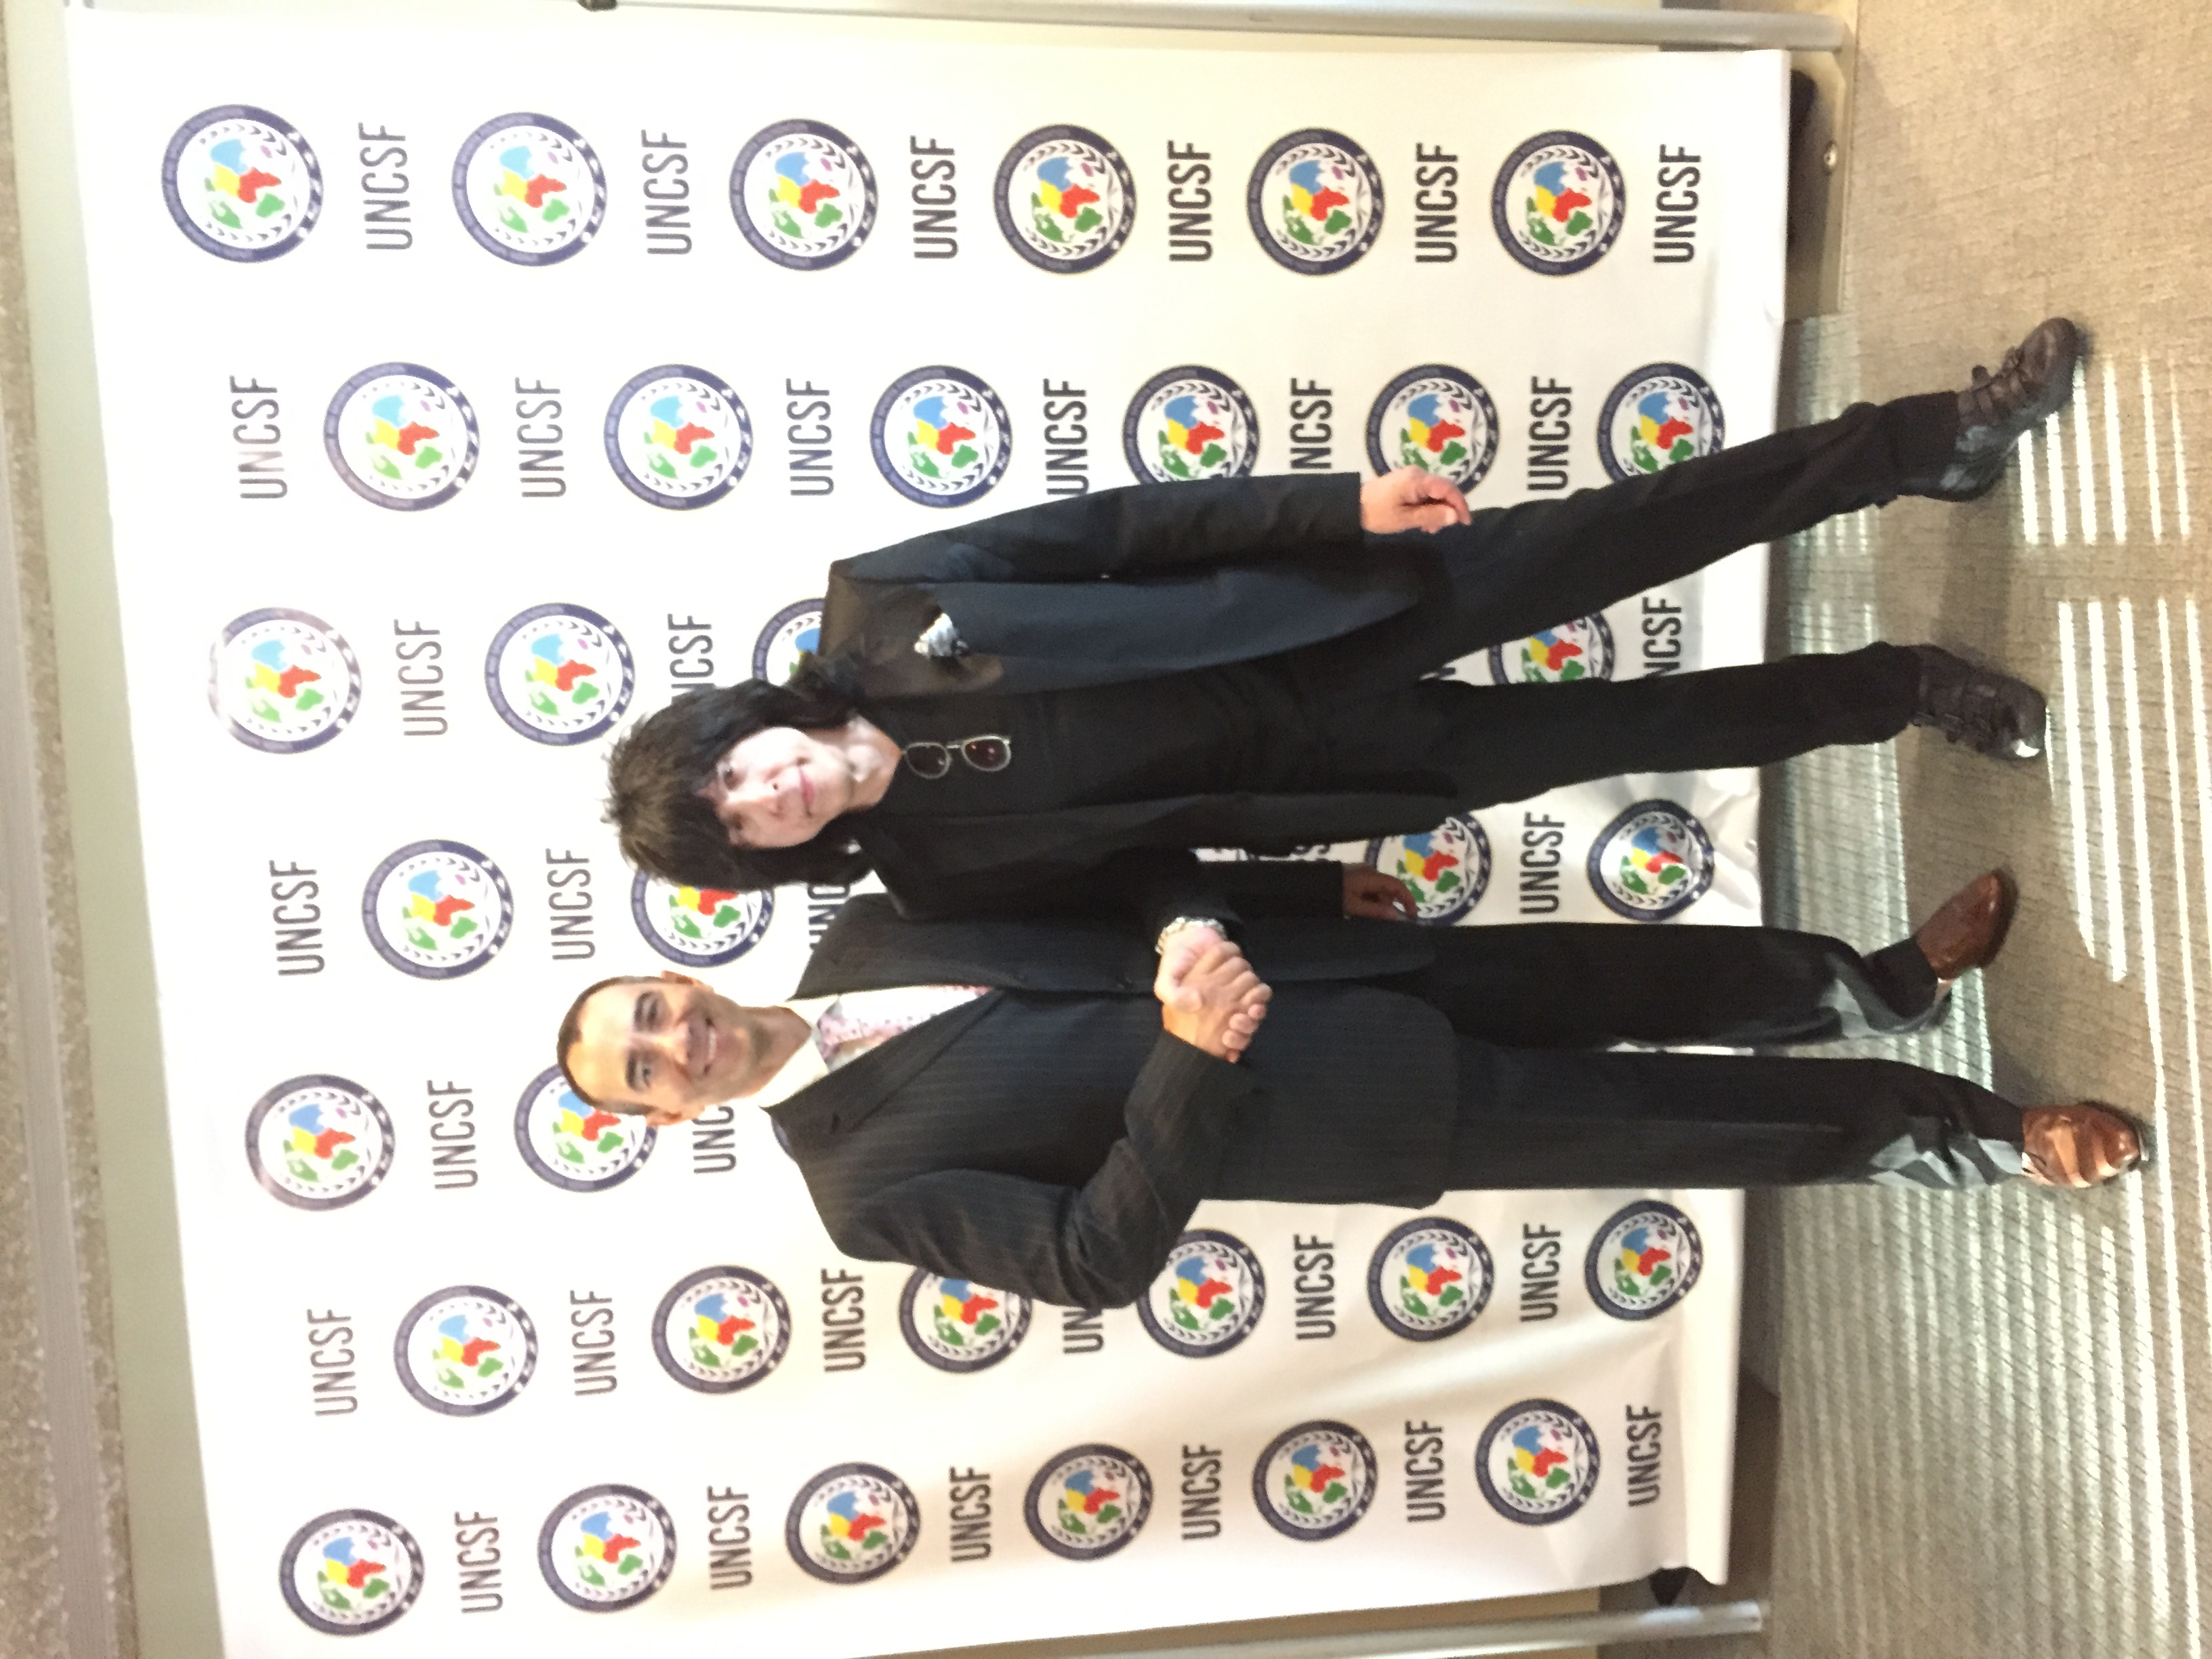 Here with Rock and Roll Hall of Fame Legend Marky Ramone of the Ramones at the United Nations UNCSF